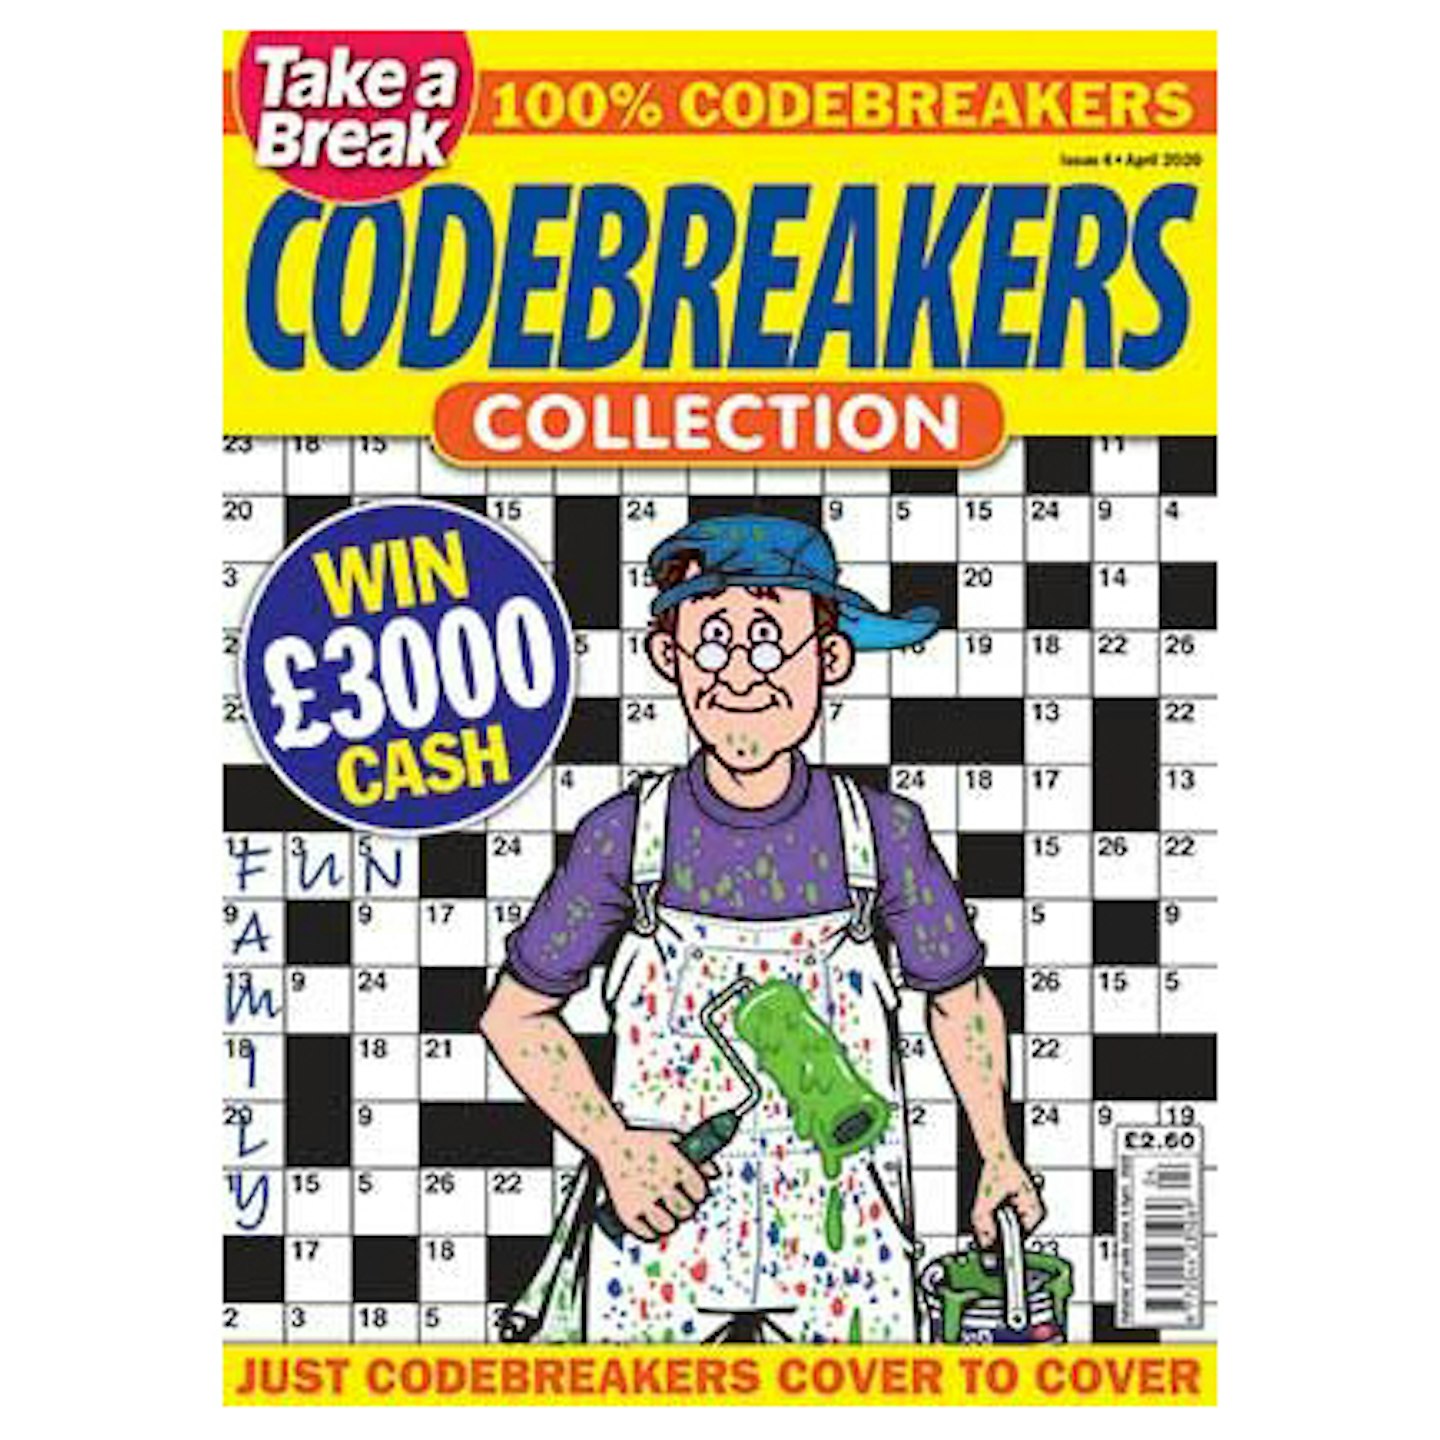 Take A Break Codebreakers Collection Subscription